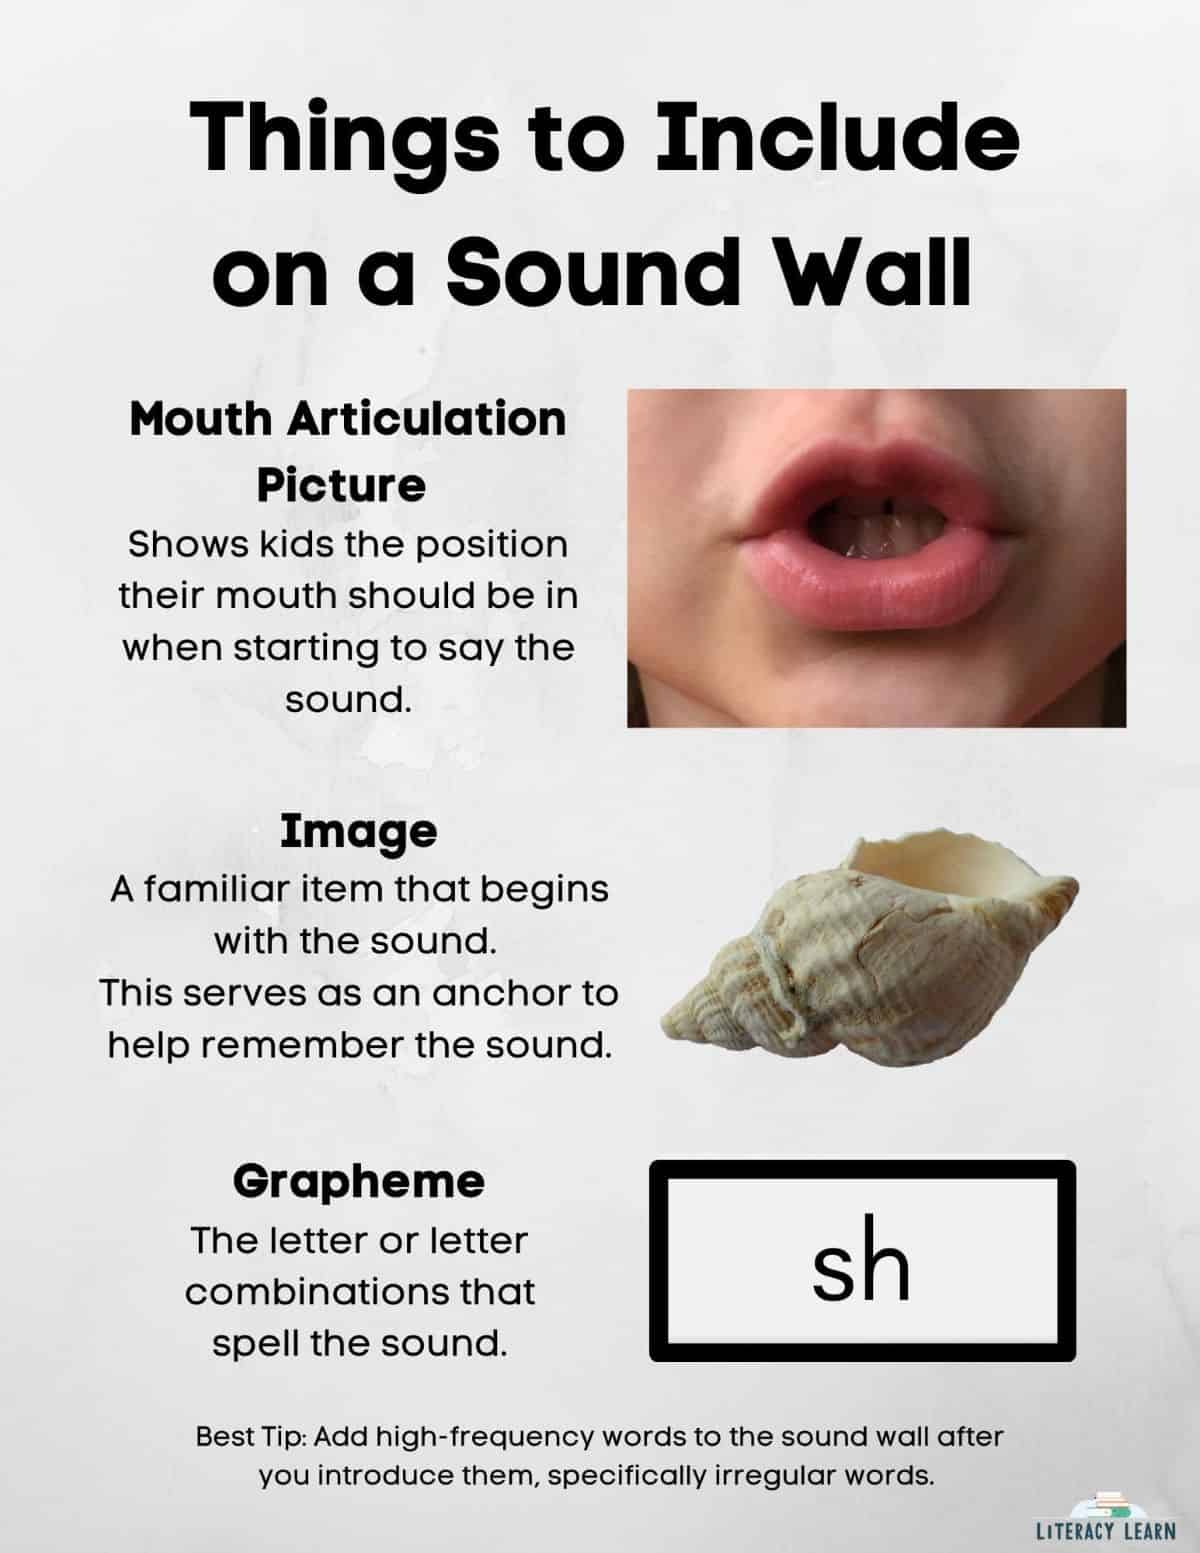 Pictures and descriptions of sound wall items: Mouth articulation photo, image, and grapheme.